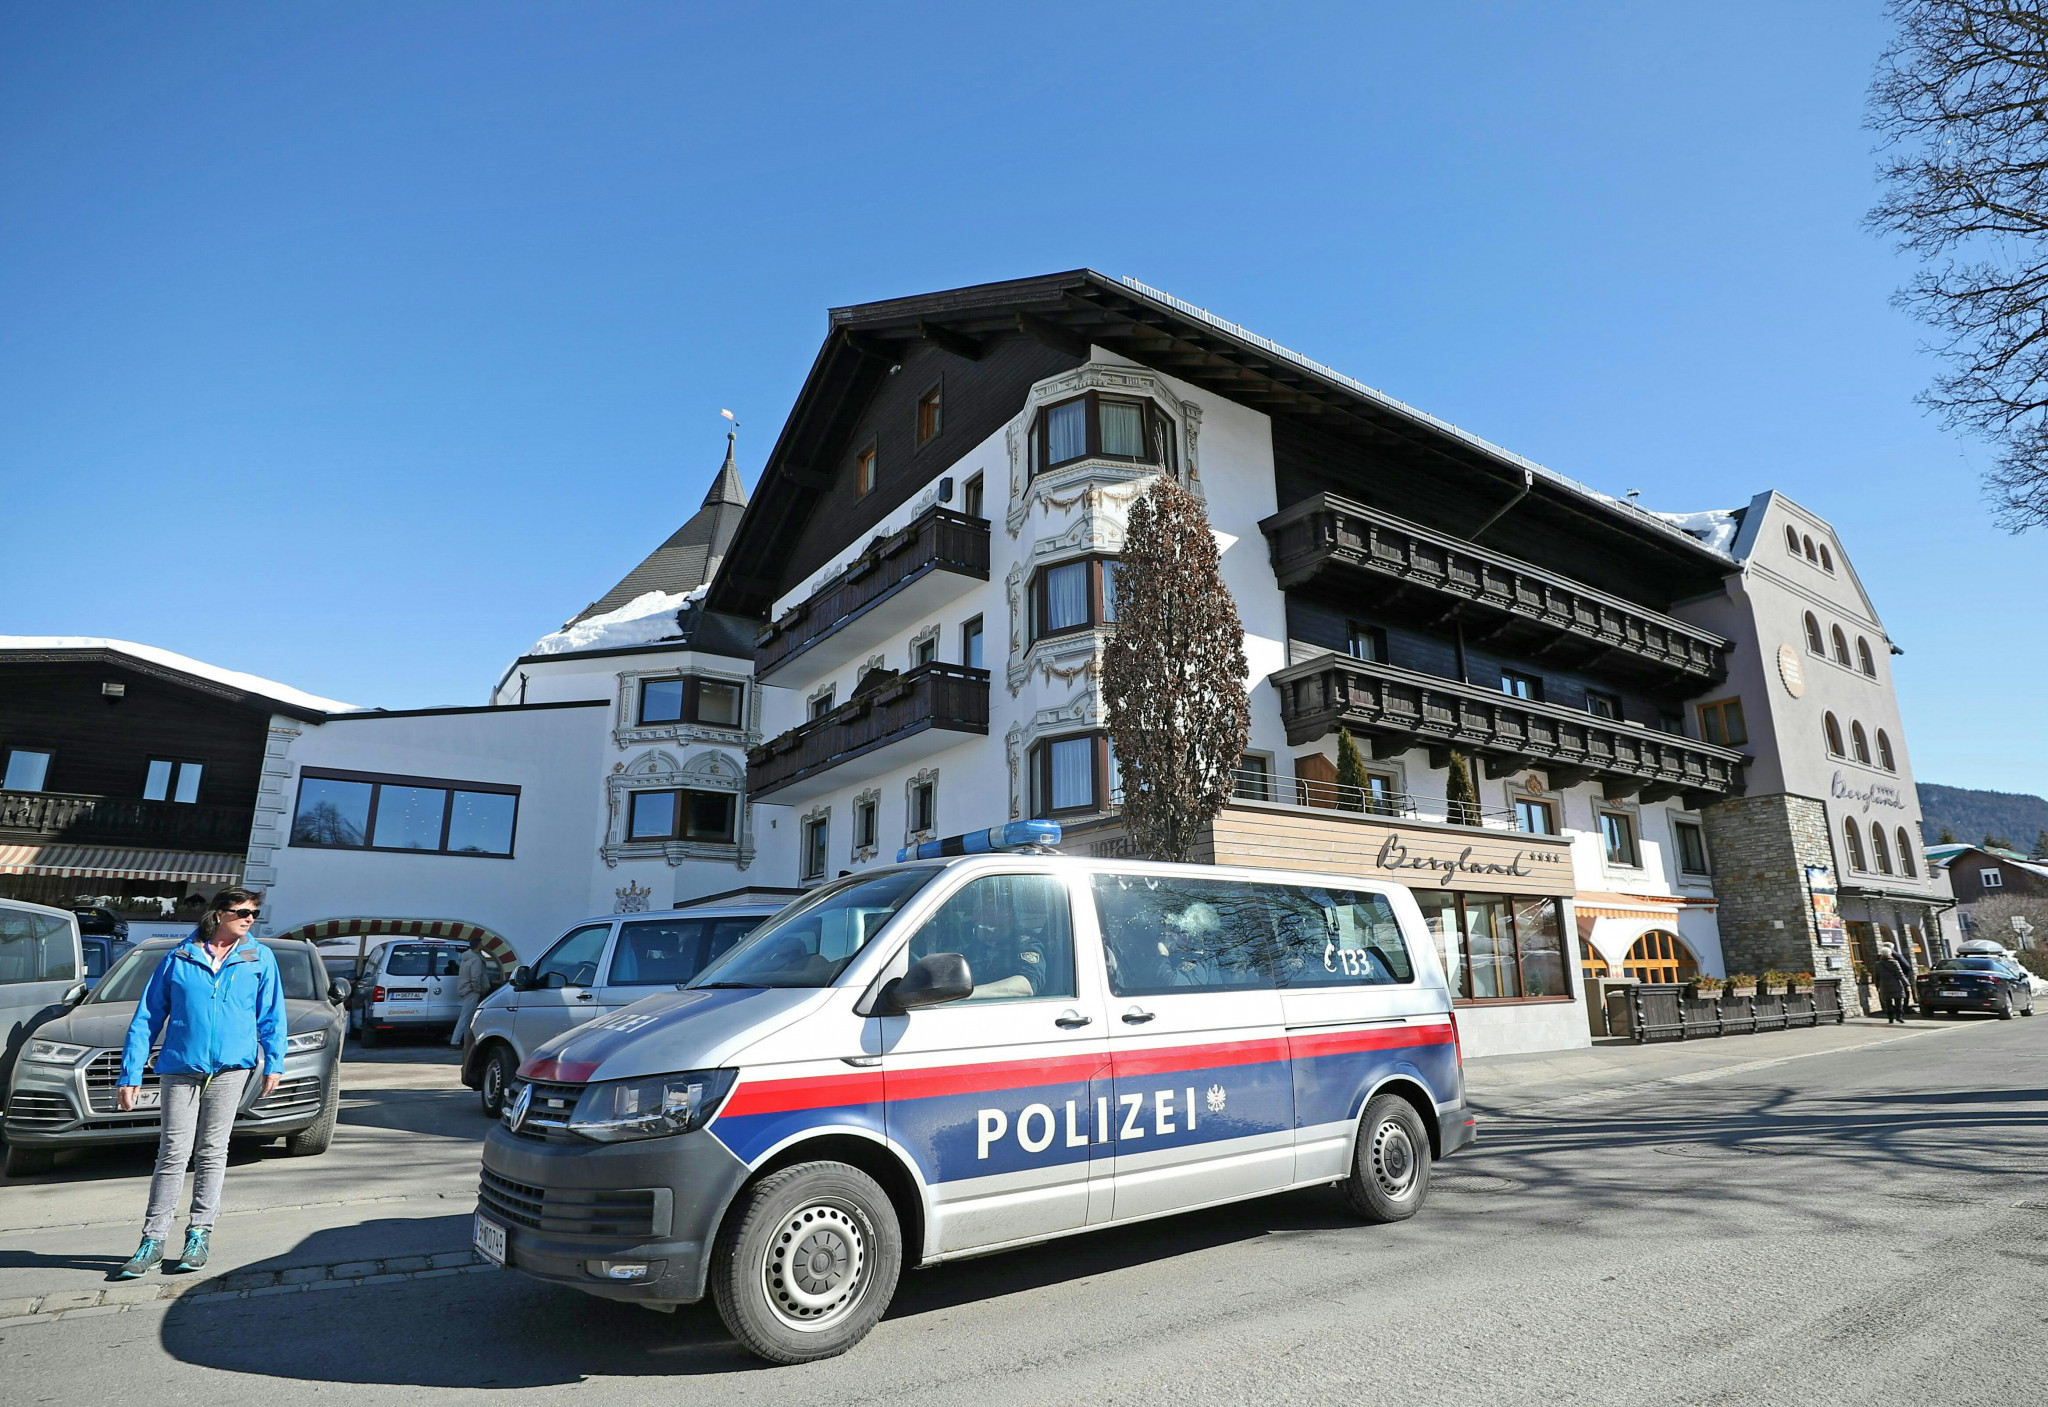 Police raids at the Seefeld World Championships have shocked skiing ©Getty Images